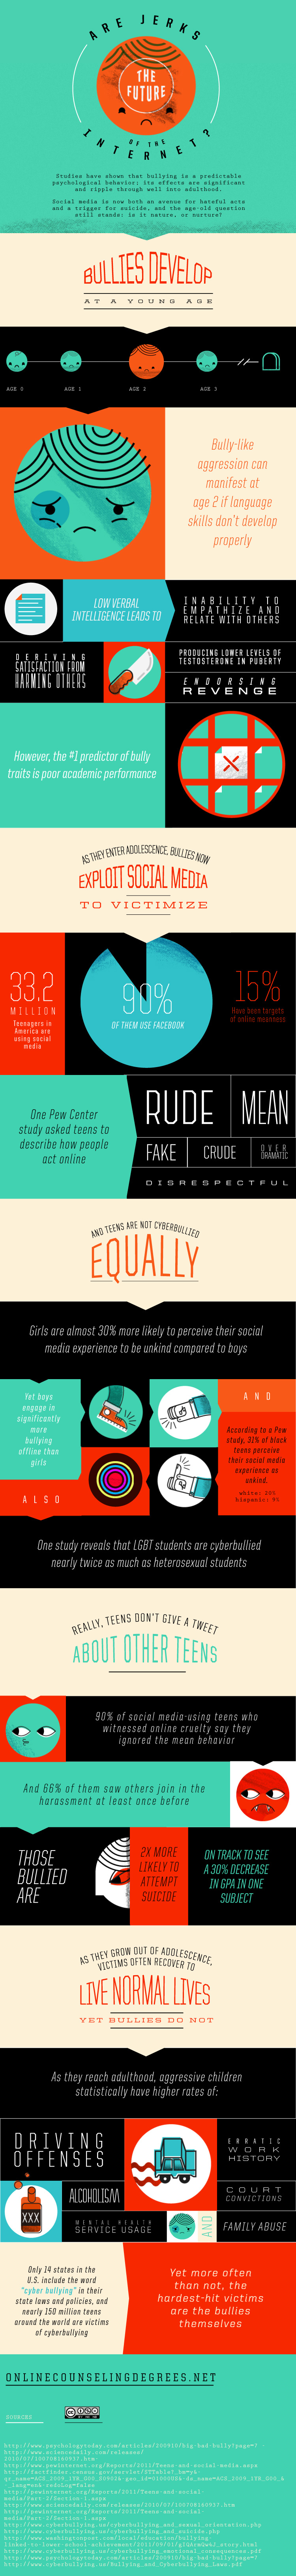 Facts about Internet Bullies